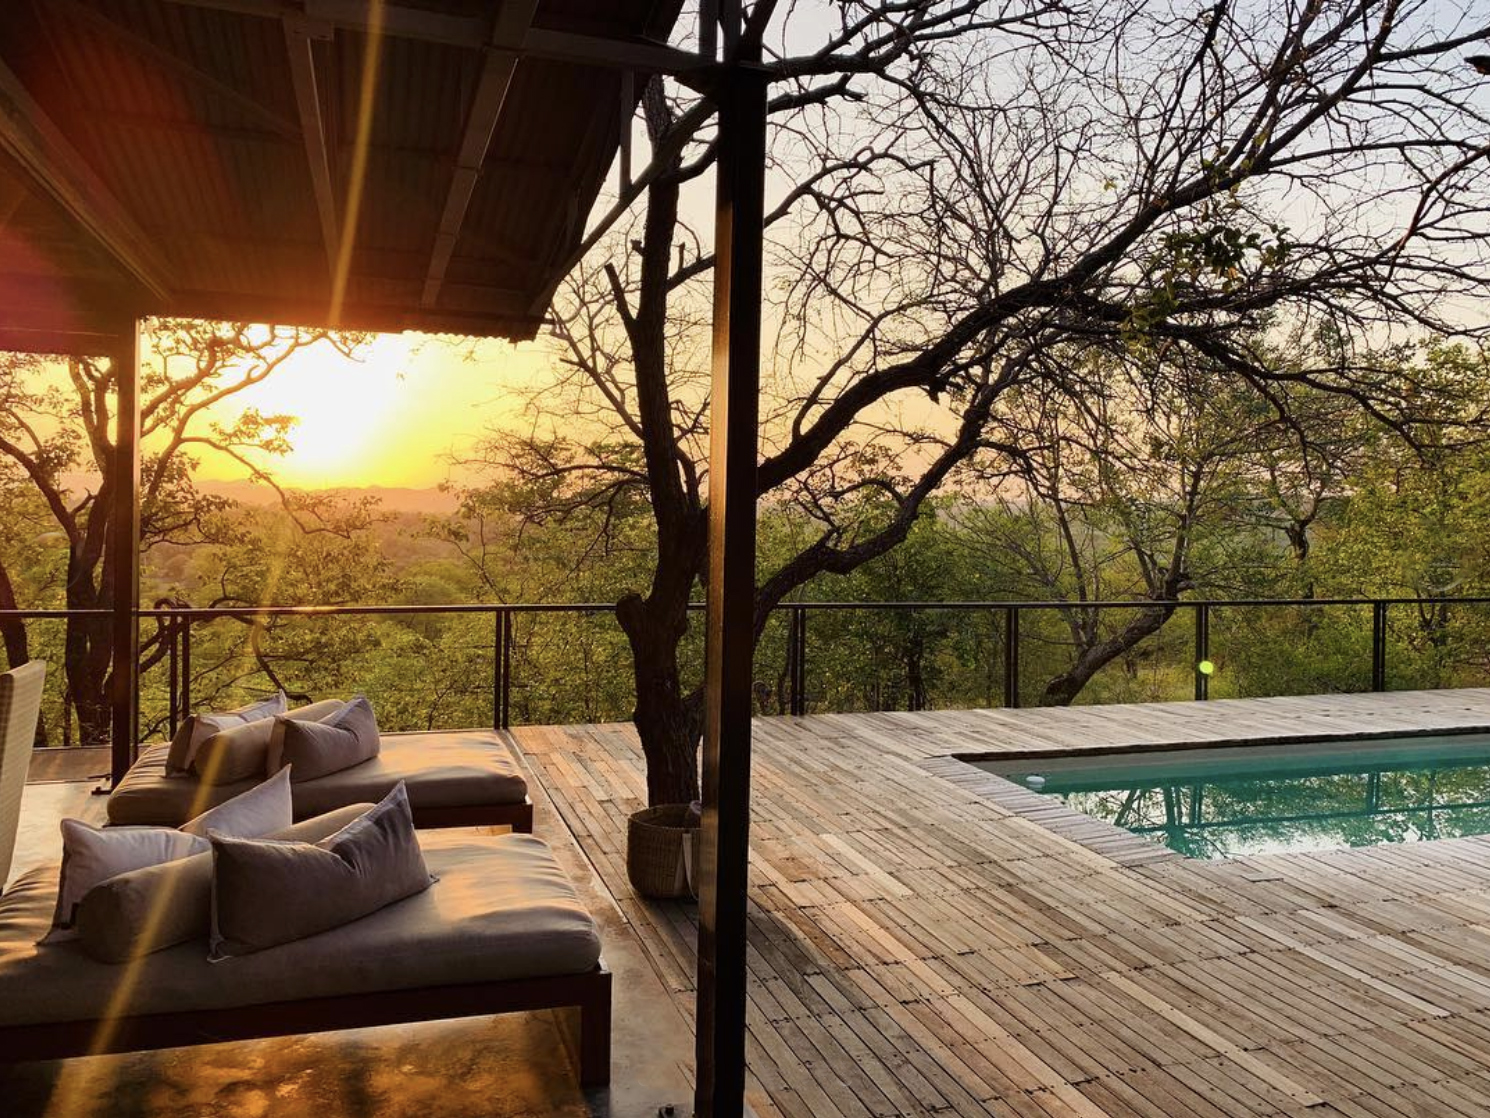 @escobarnic captured a magnificent sunrise from the pool deck before grabbing a quick cup of coffee and hopping into the Land Rover for the early morning game drive.